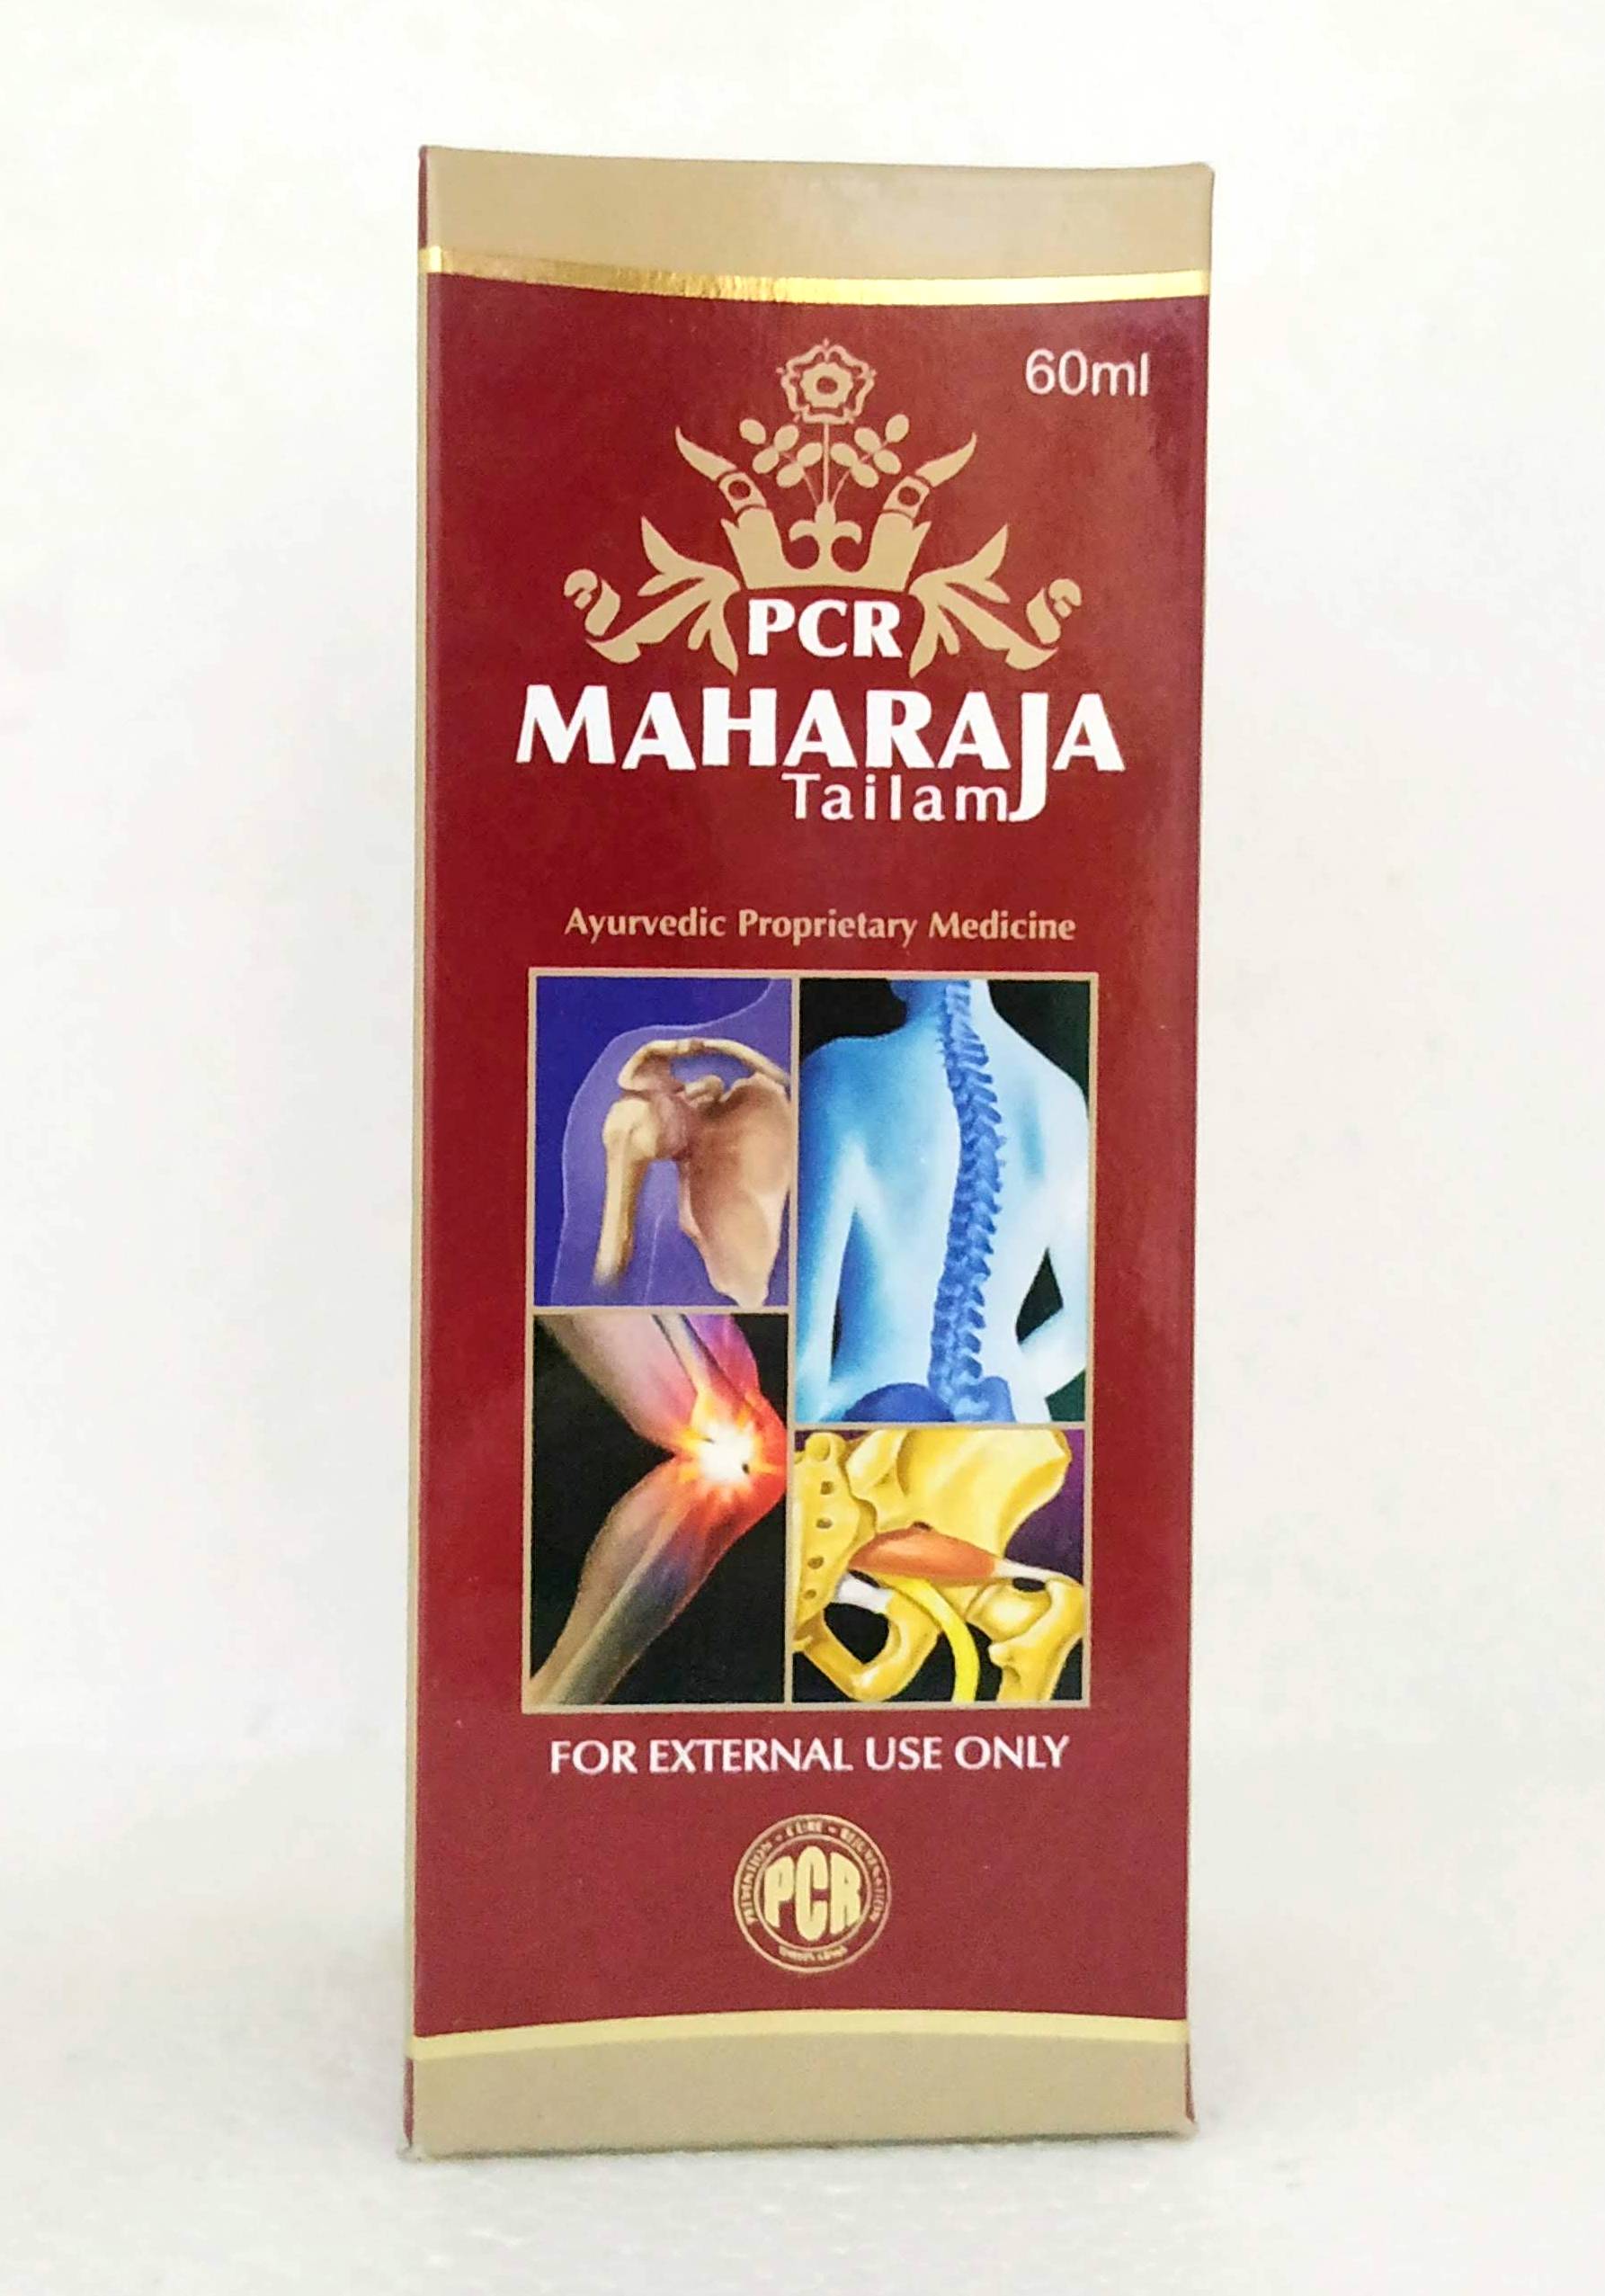 Shop Maharaja thailam 60ml at price 120.00 from PCR Online - Ayush Care